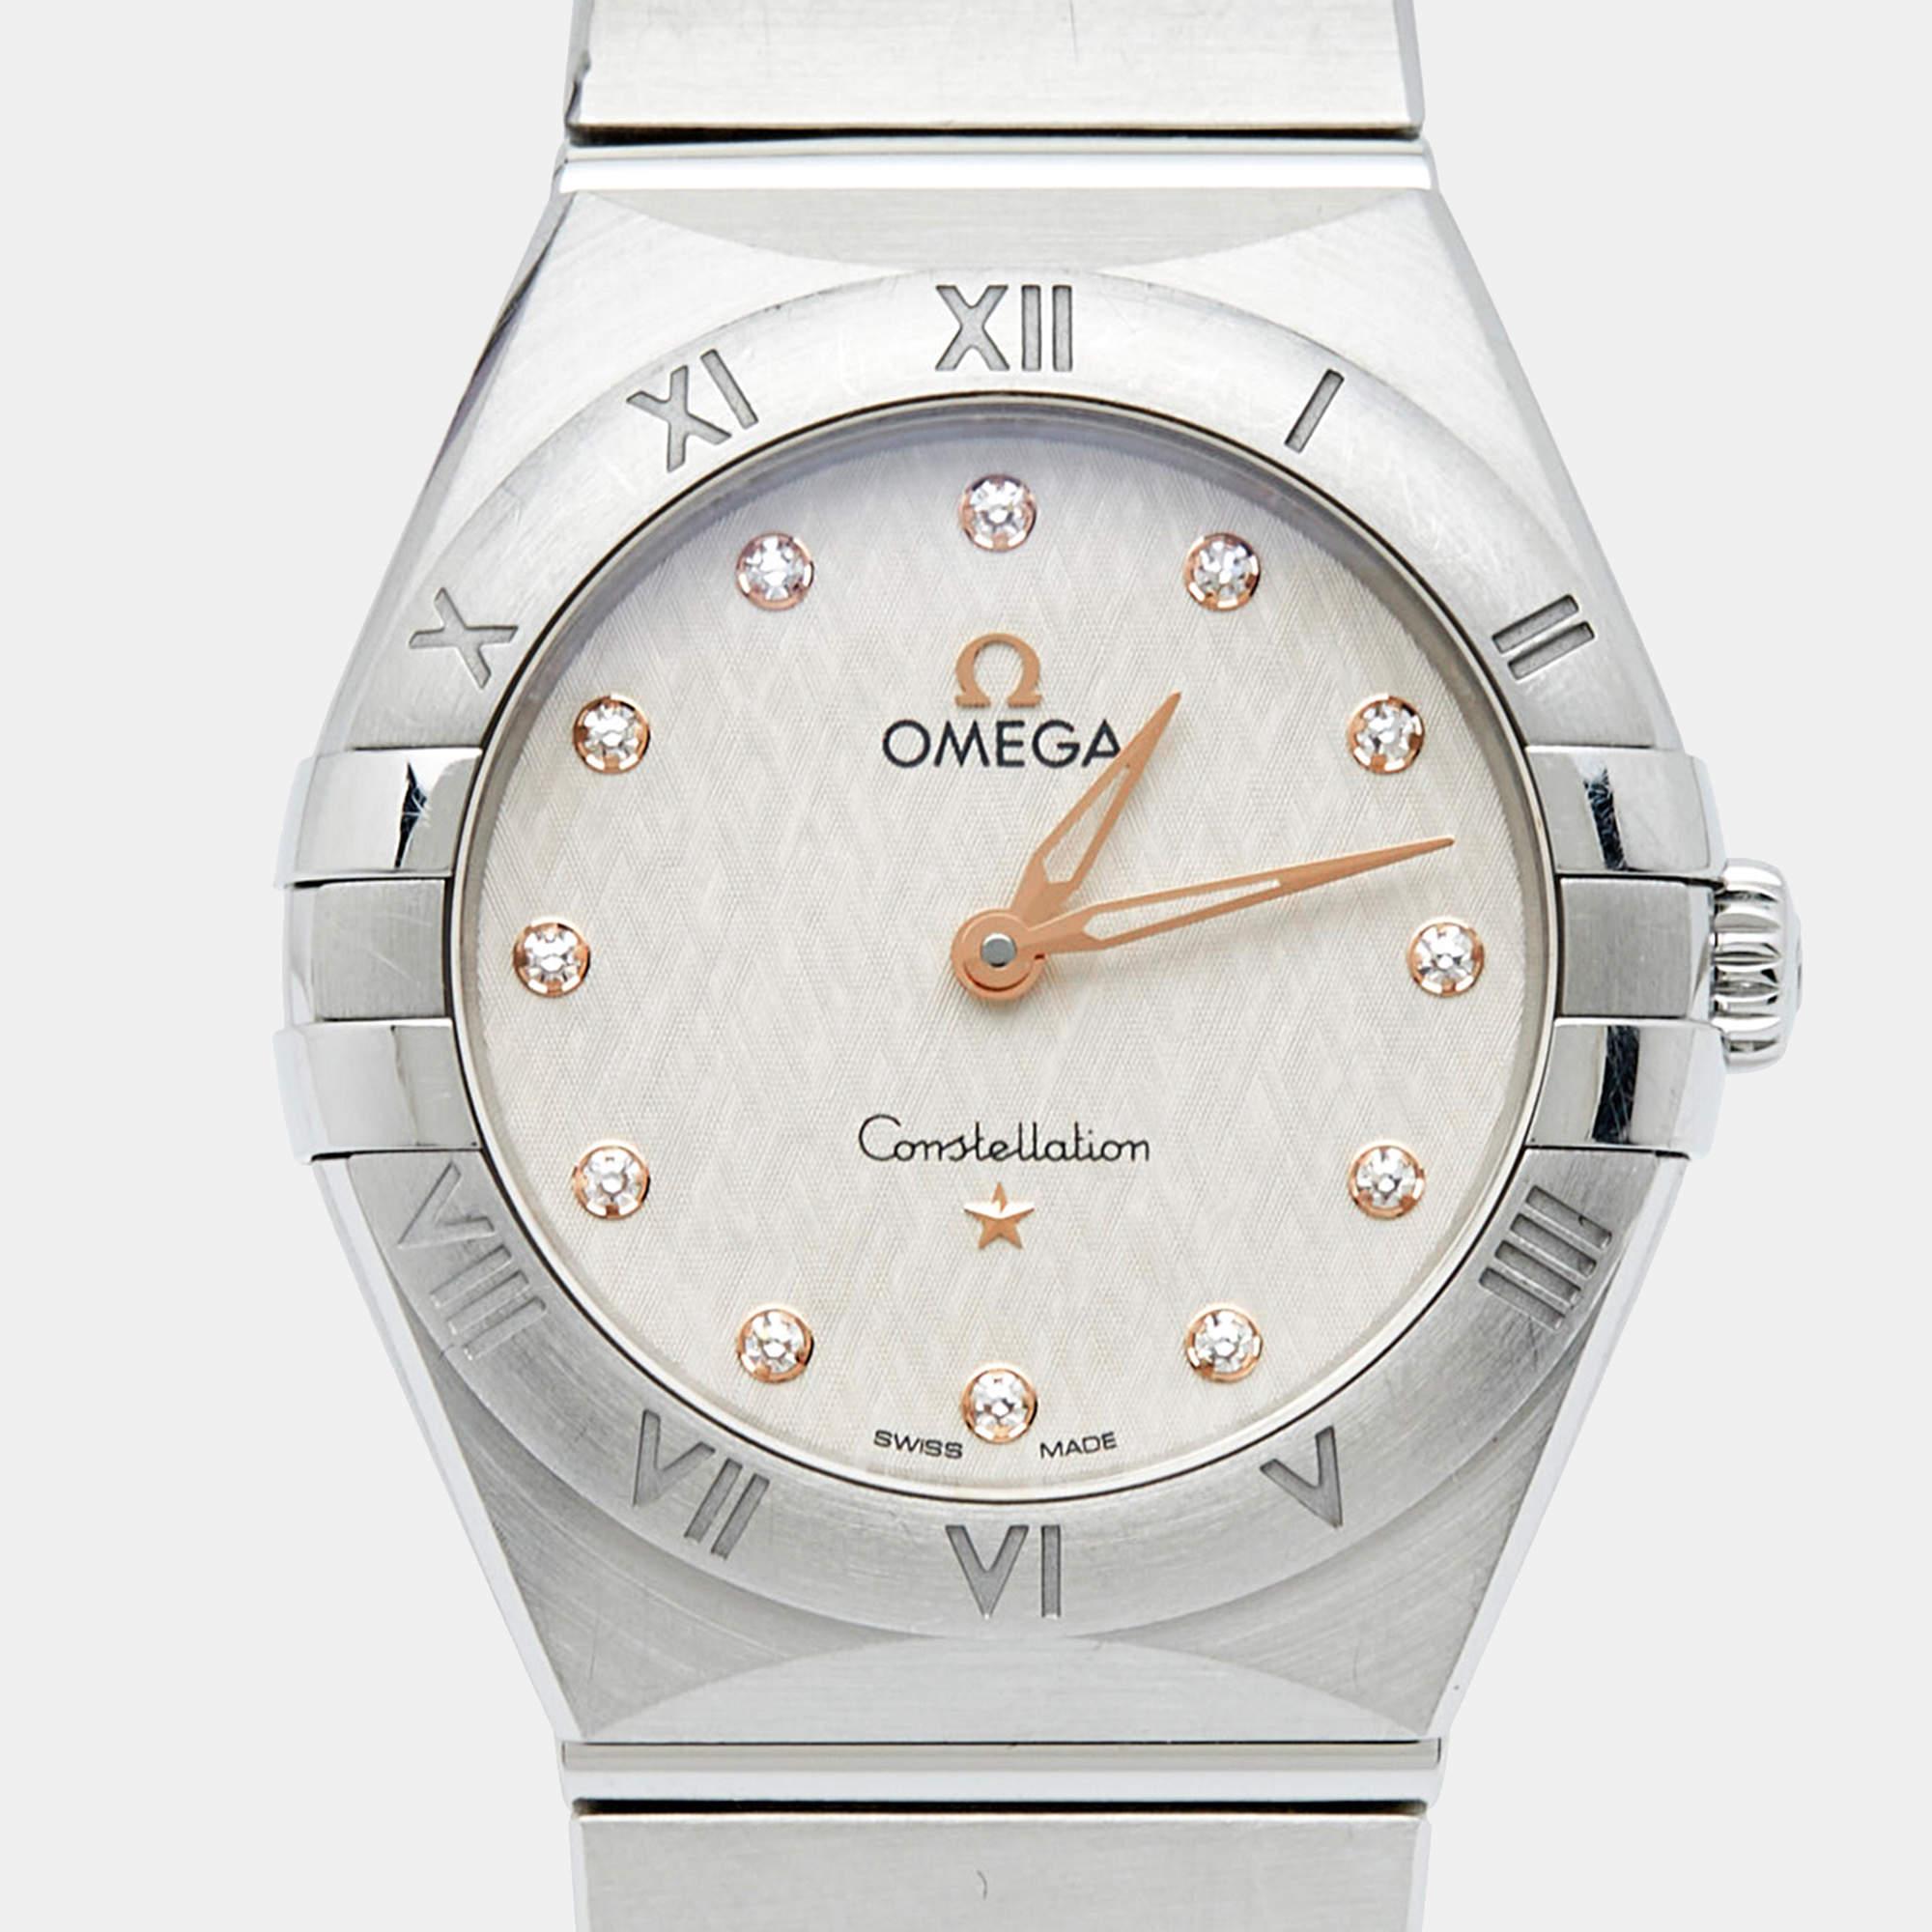 A meticulously crafted watch holds the promise of enduring appeal, all-day comfort, and investment value. Carefully assembled and finished to stand out on your wrist, this Omega diamond Constellation timepiece is a purchase you will